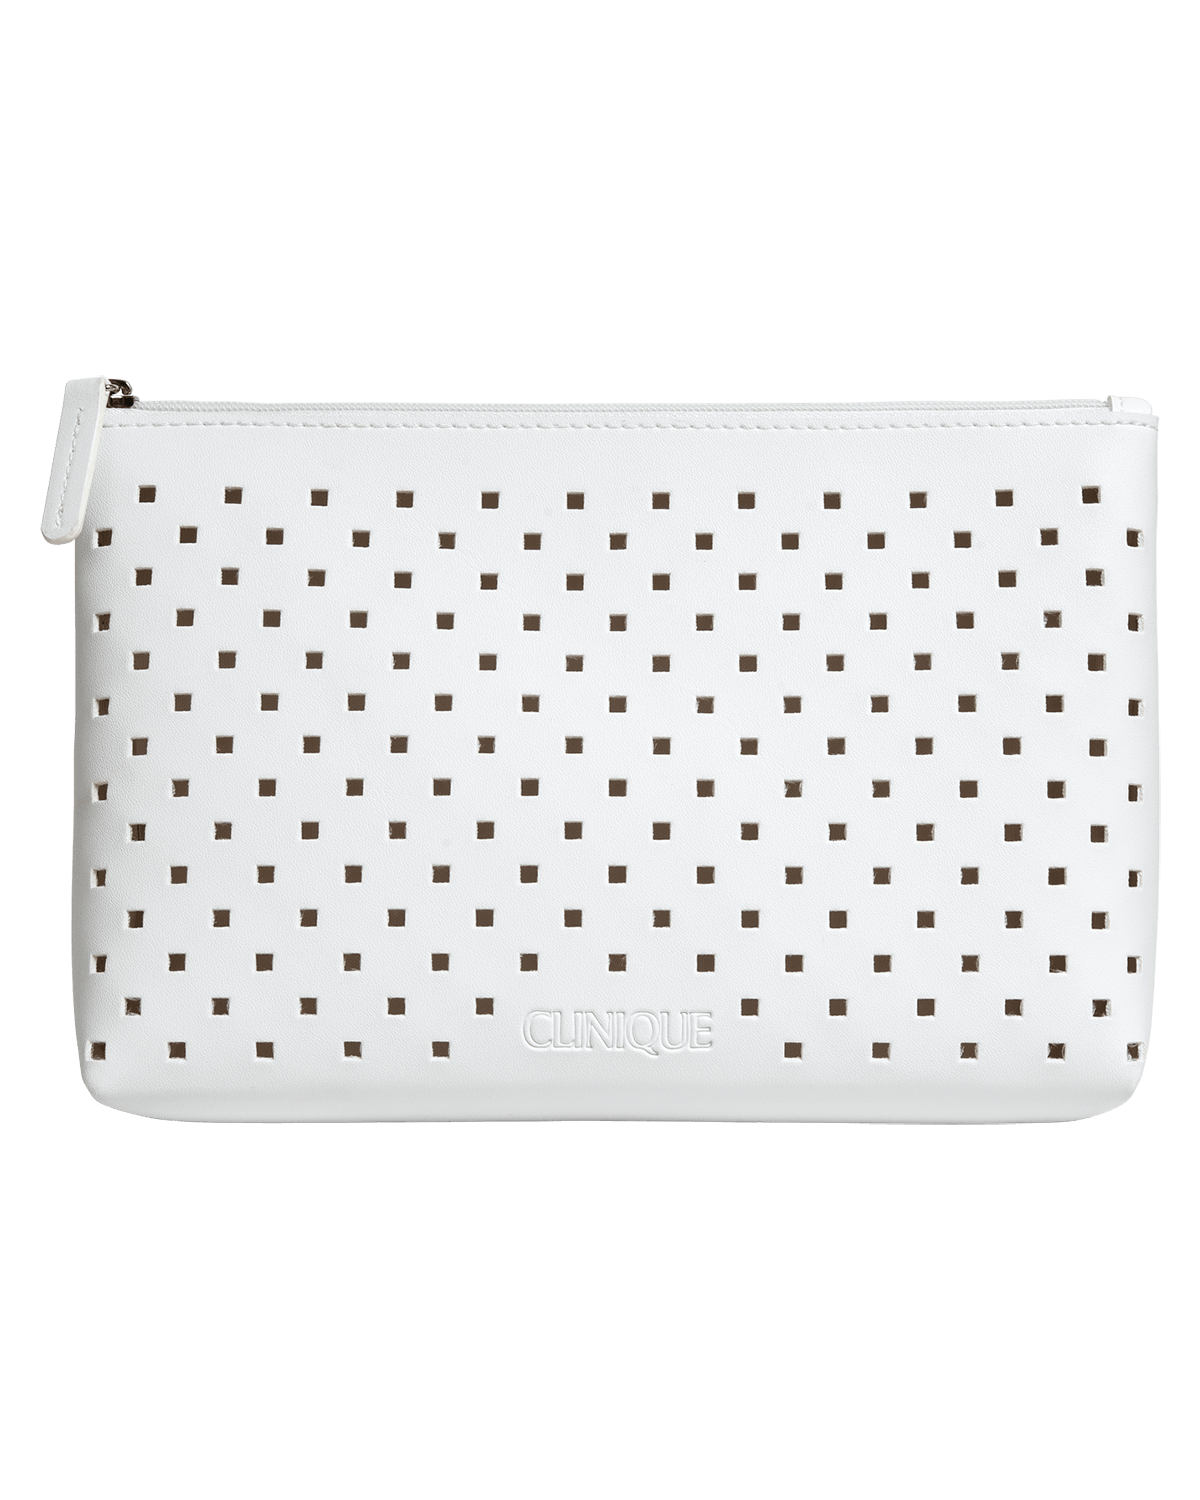 Summer in Clinique pouch